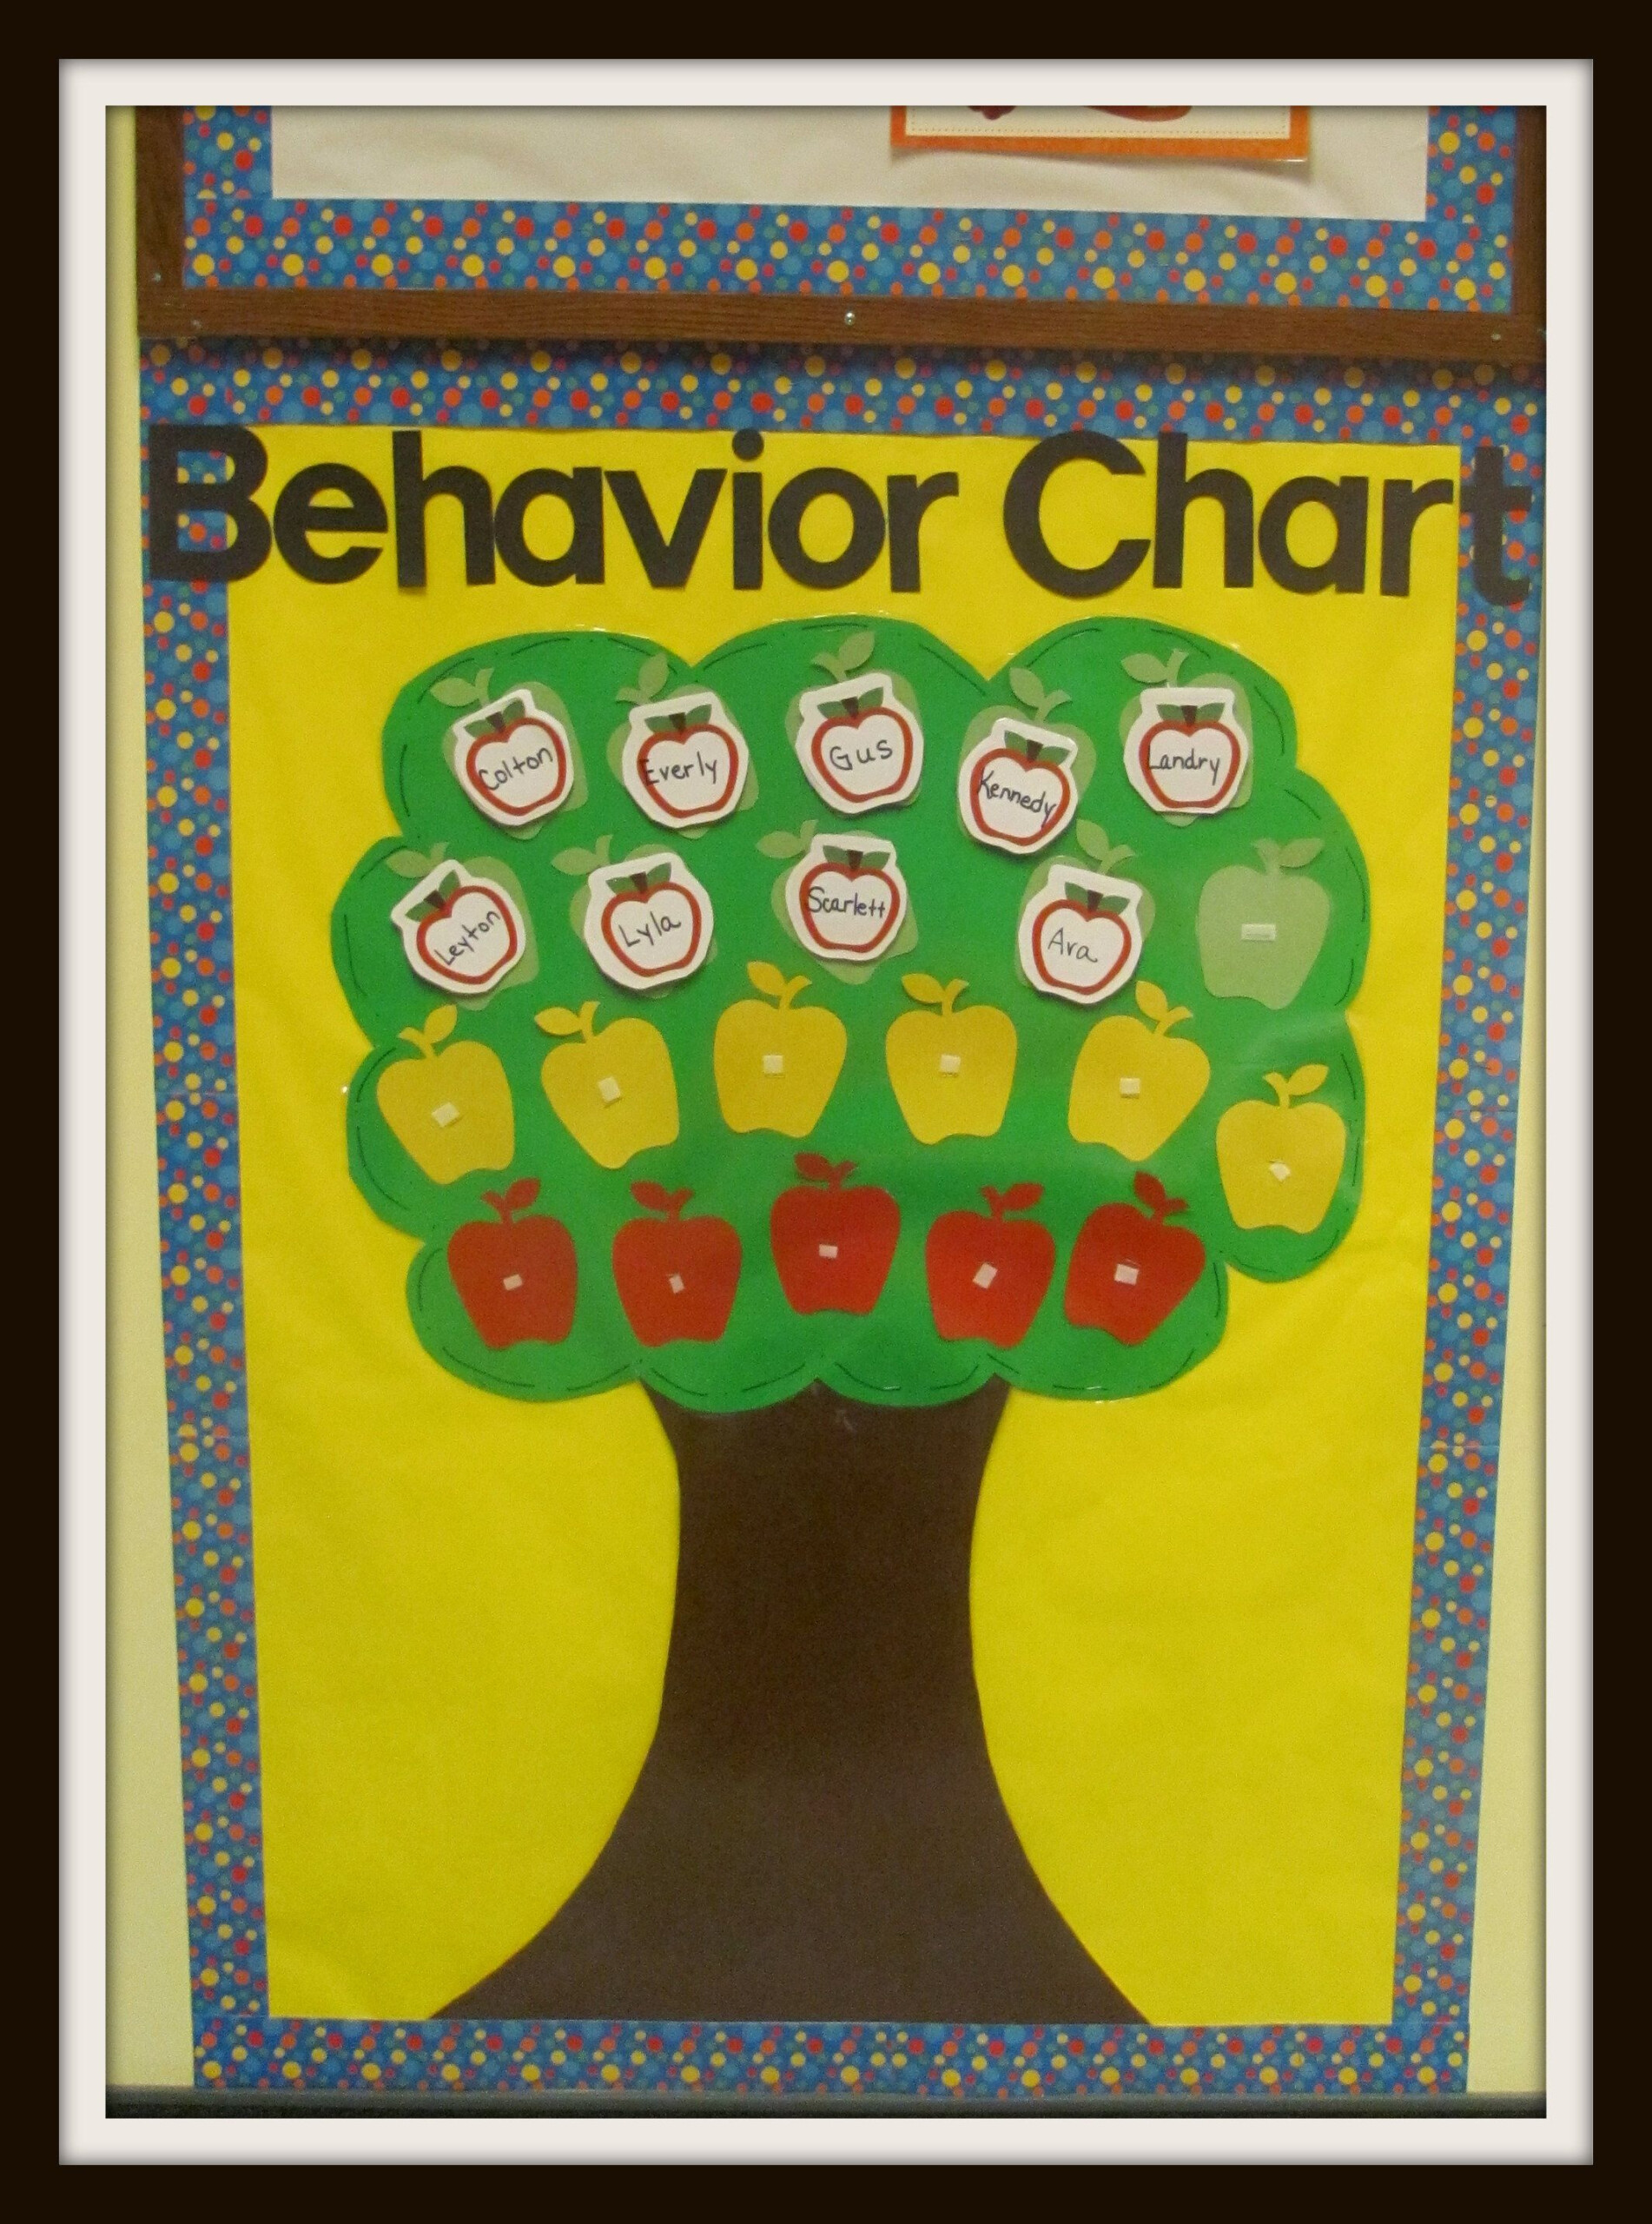 Behavior Chart Move Students From Green To Bellow To Red Based In